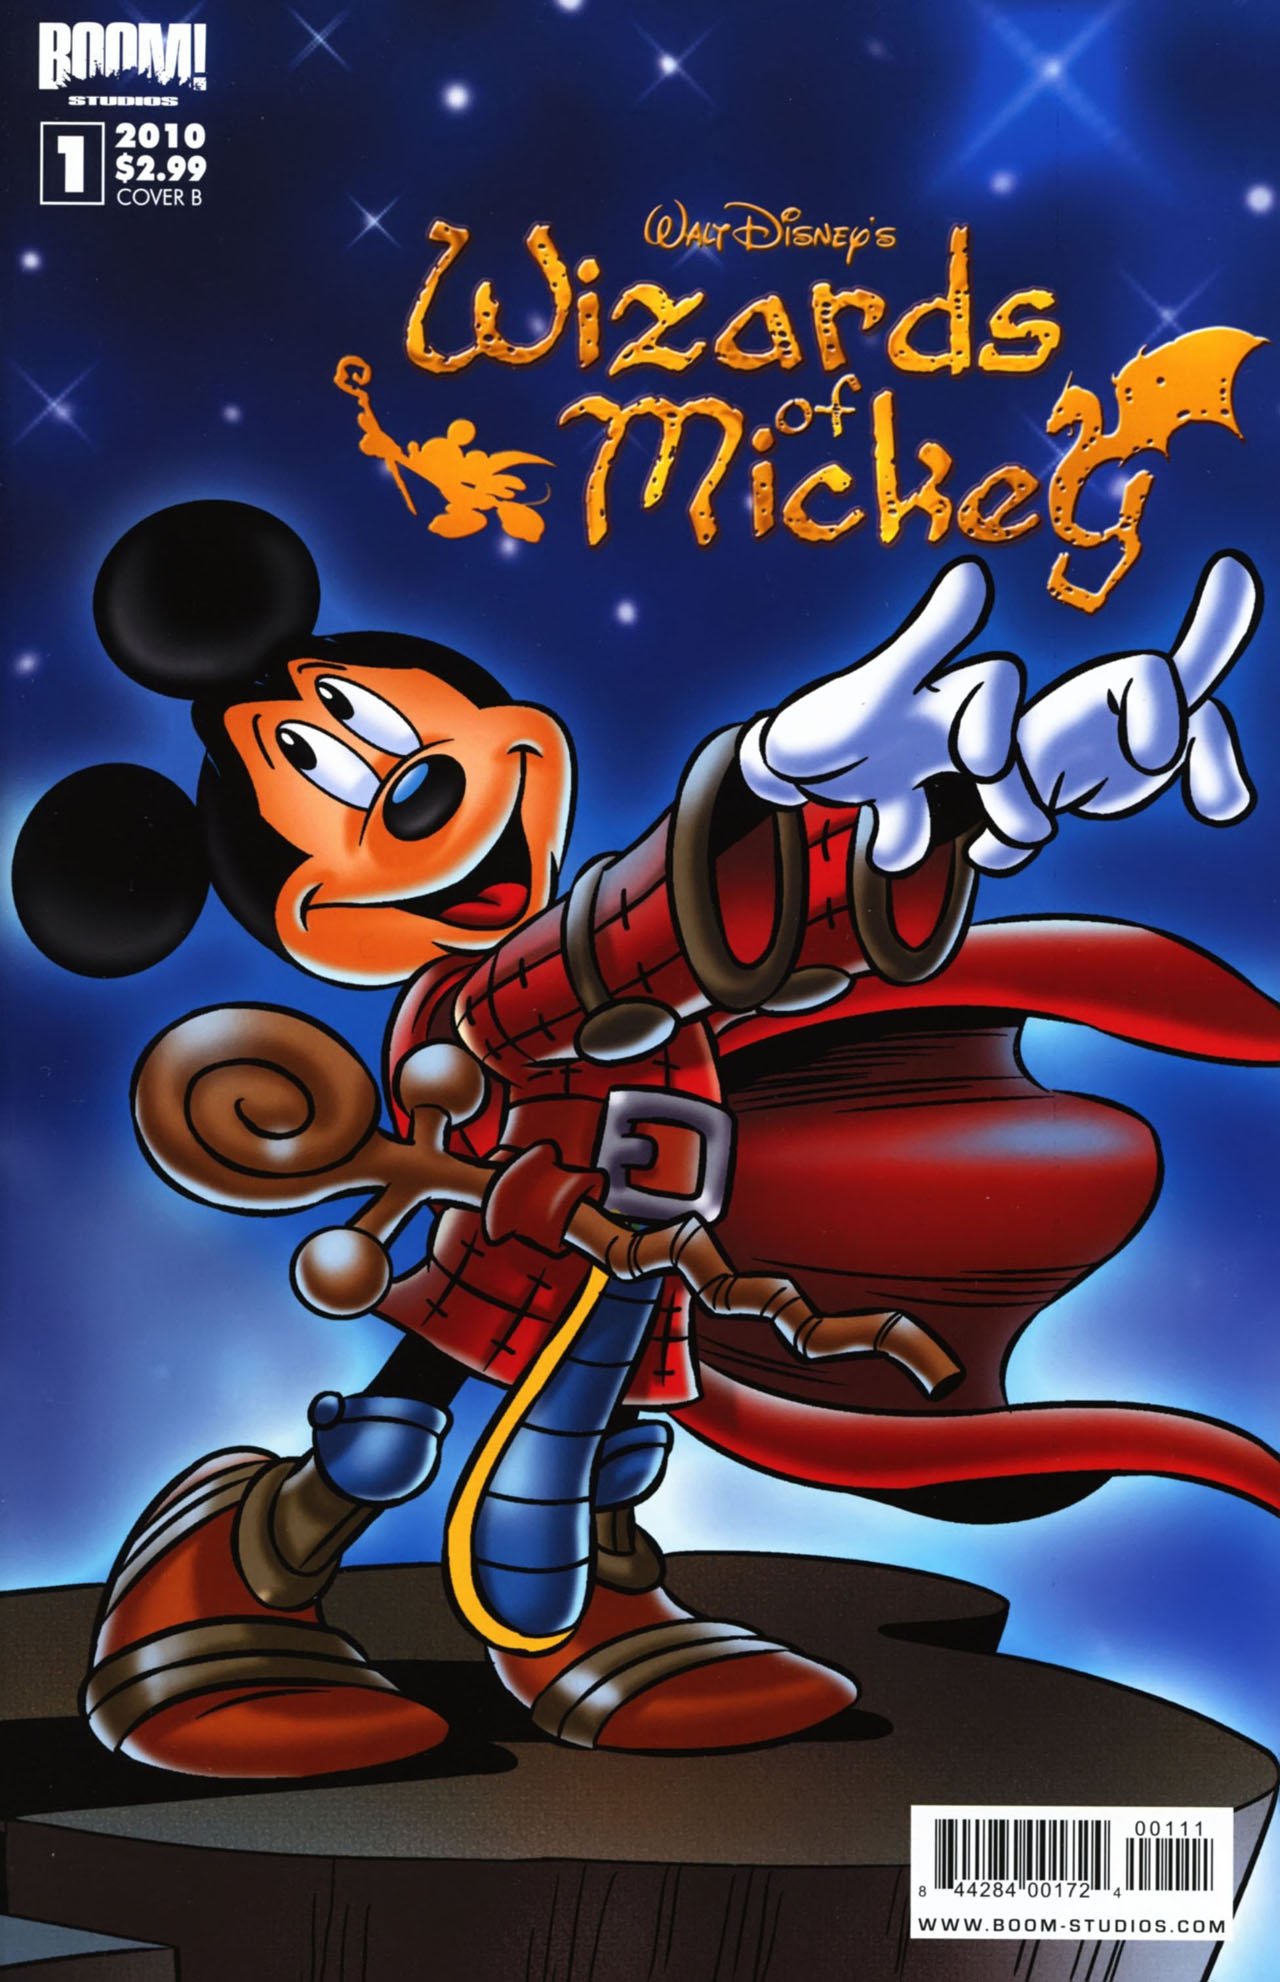 Read online Wizards of Mickey comic -  Issue #1 - 2